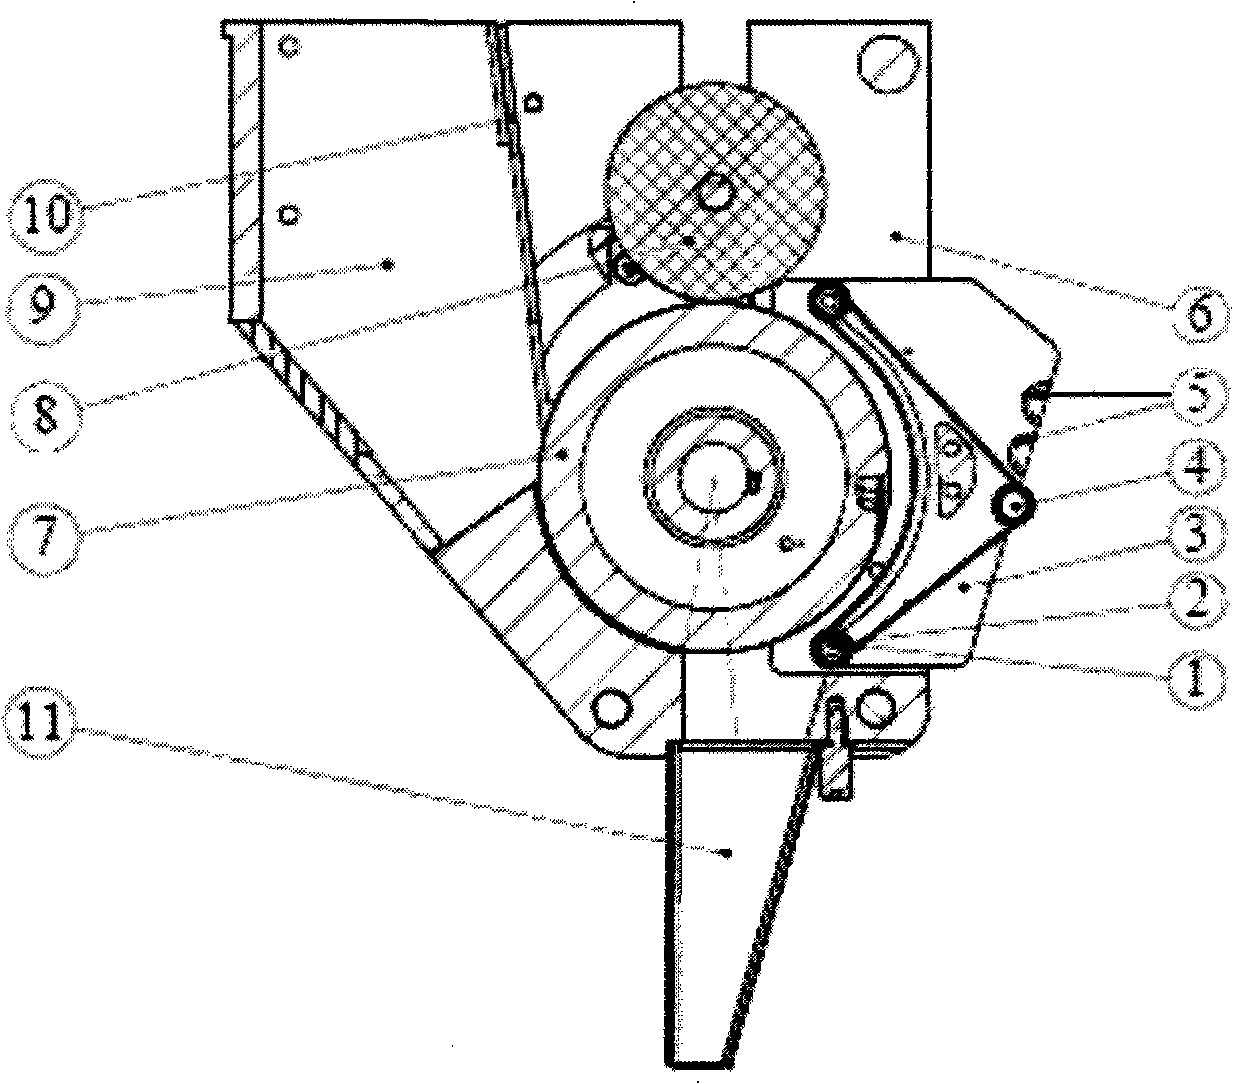 Cereal seed sowing device with detachable elastic rotating seed protection device